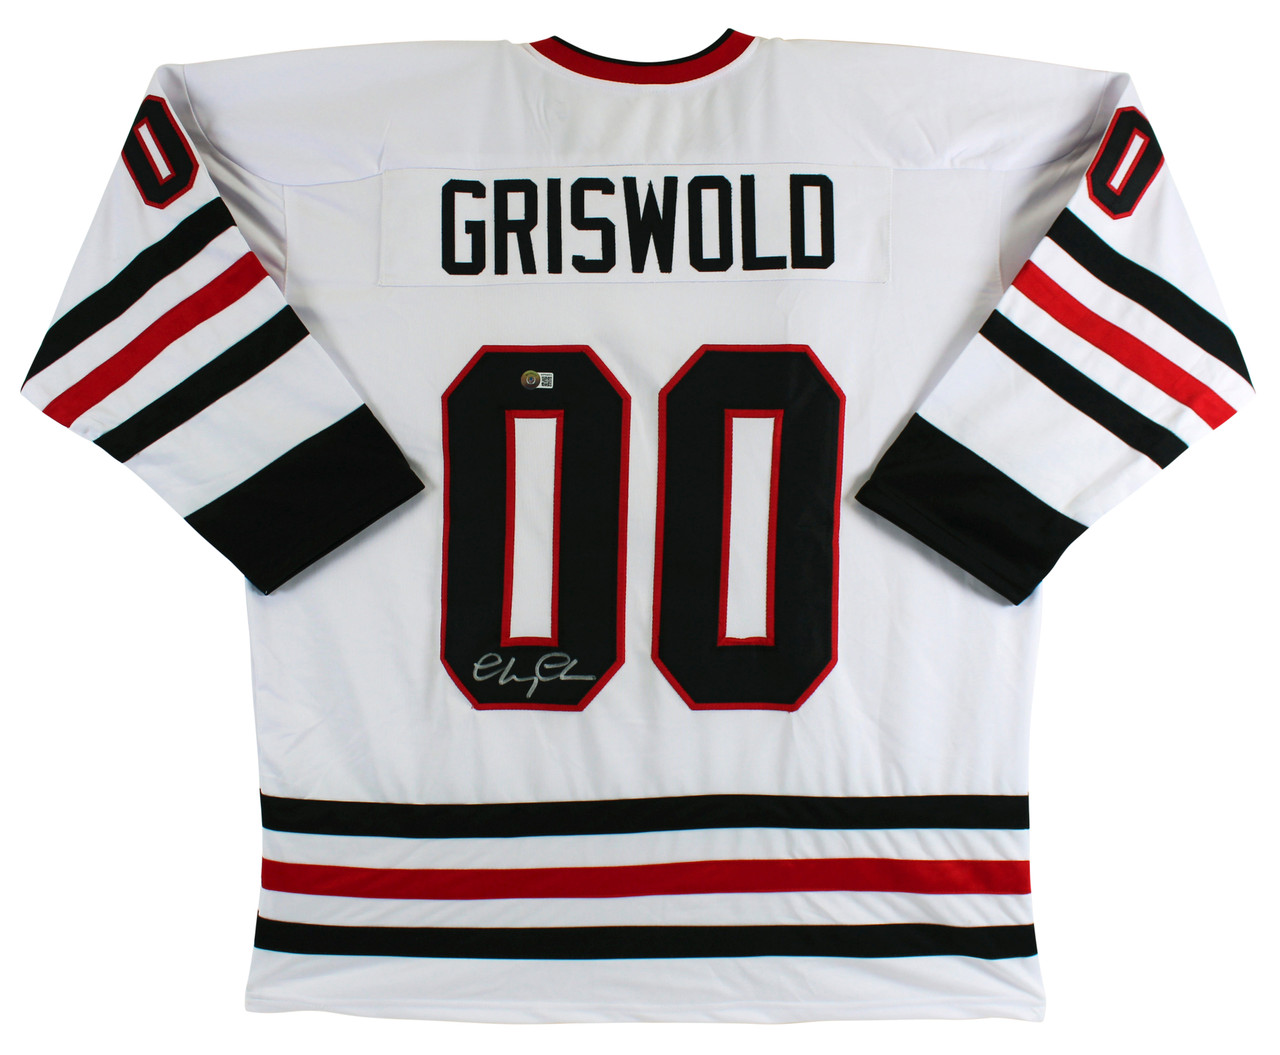 Chevy Chase Clark Griswold Christmas Vacation Signed Jersey Beckett Coa